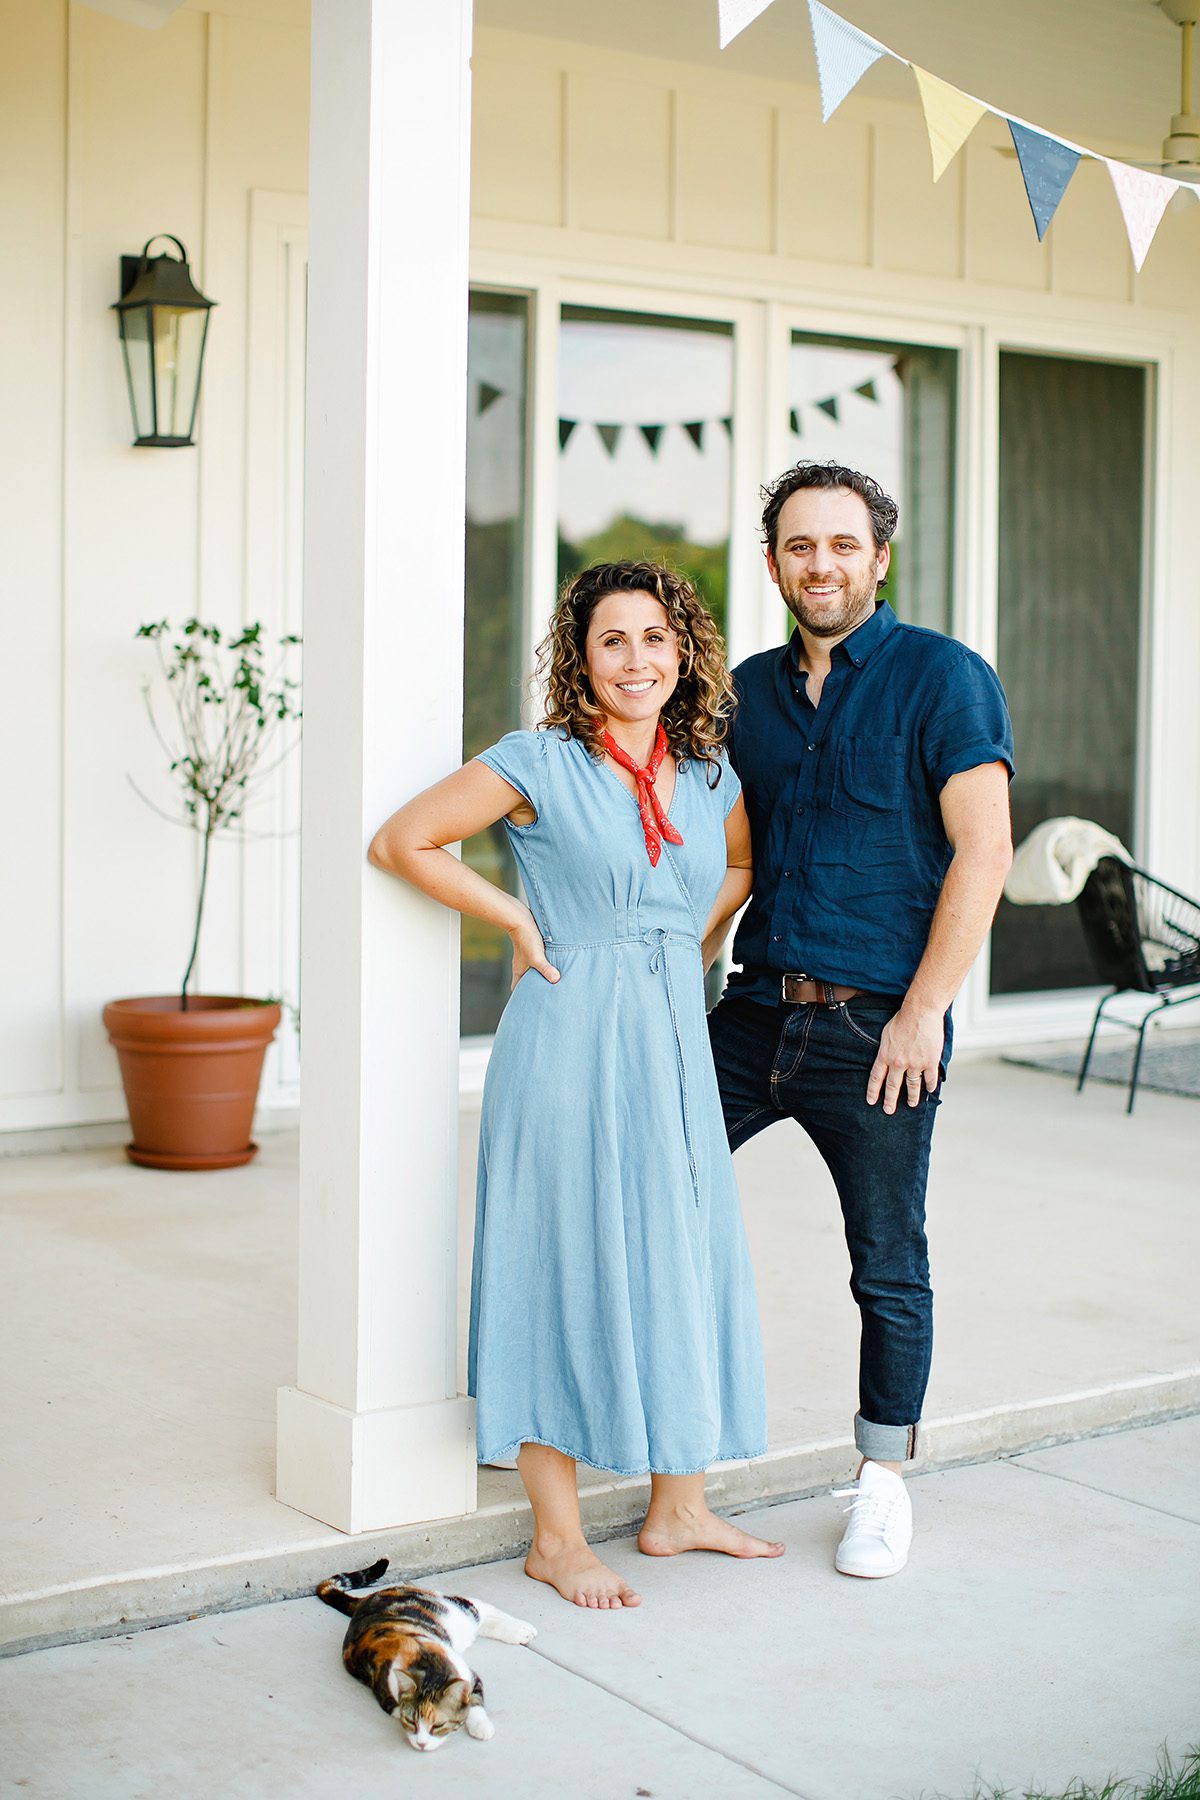 Nick and Christina Caster of Caster Studios in Dripping Springs, Texas